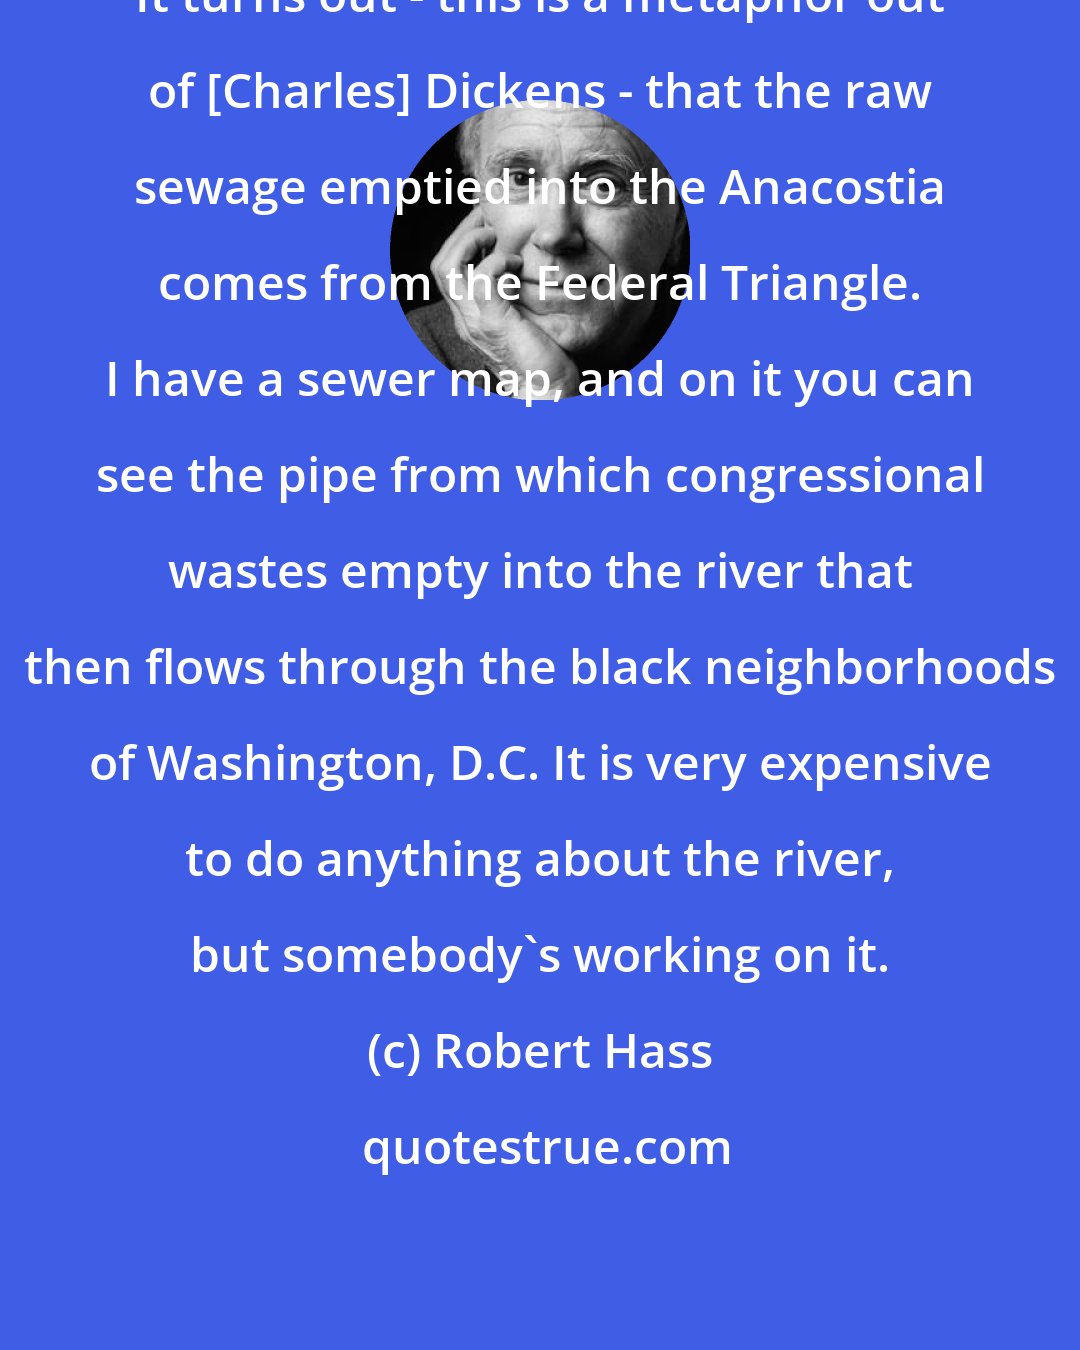 Robert Hass: It turns out - this is a metaphor out of [Charles] Dickens - that the raw sewage emptied into the Anacostia comes from the Federal Triangle. I have a sewer map, and on it you can see the pipe from which congressional wastes empty into the river that then flows through the black neighborhoods of Washington, D.C. It is very expensive to do anything about the river, but somebody's working on it.